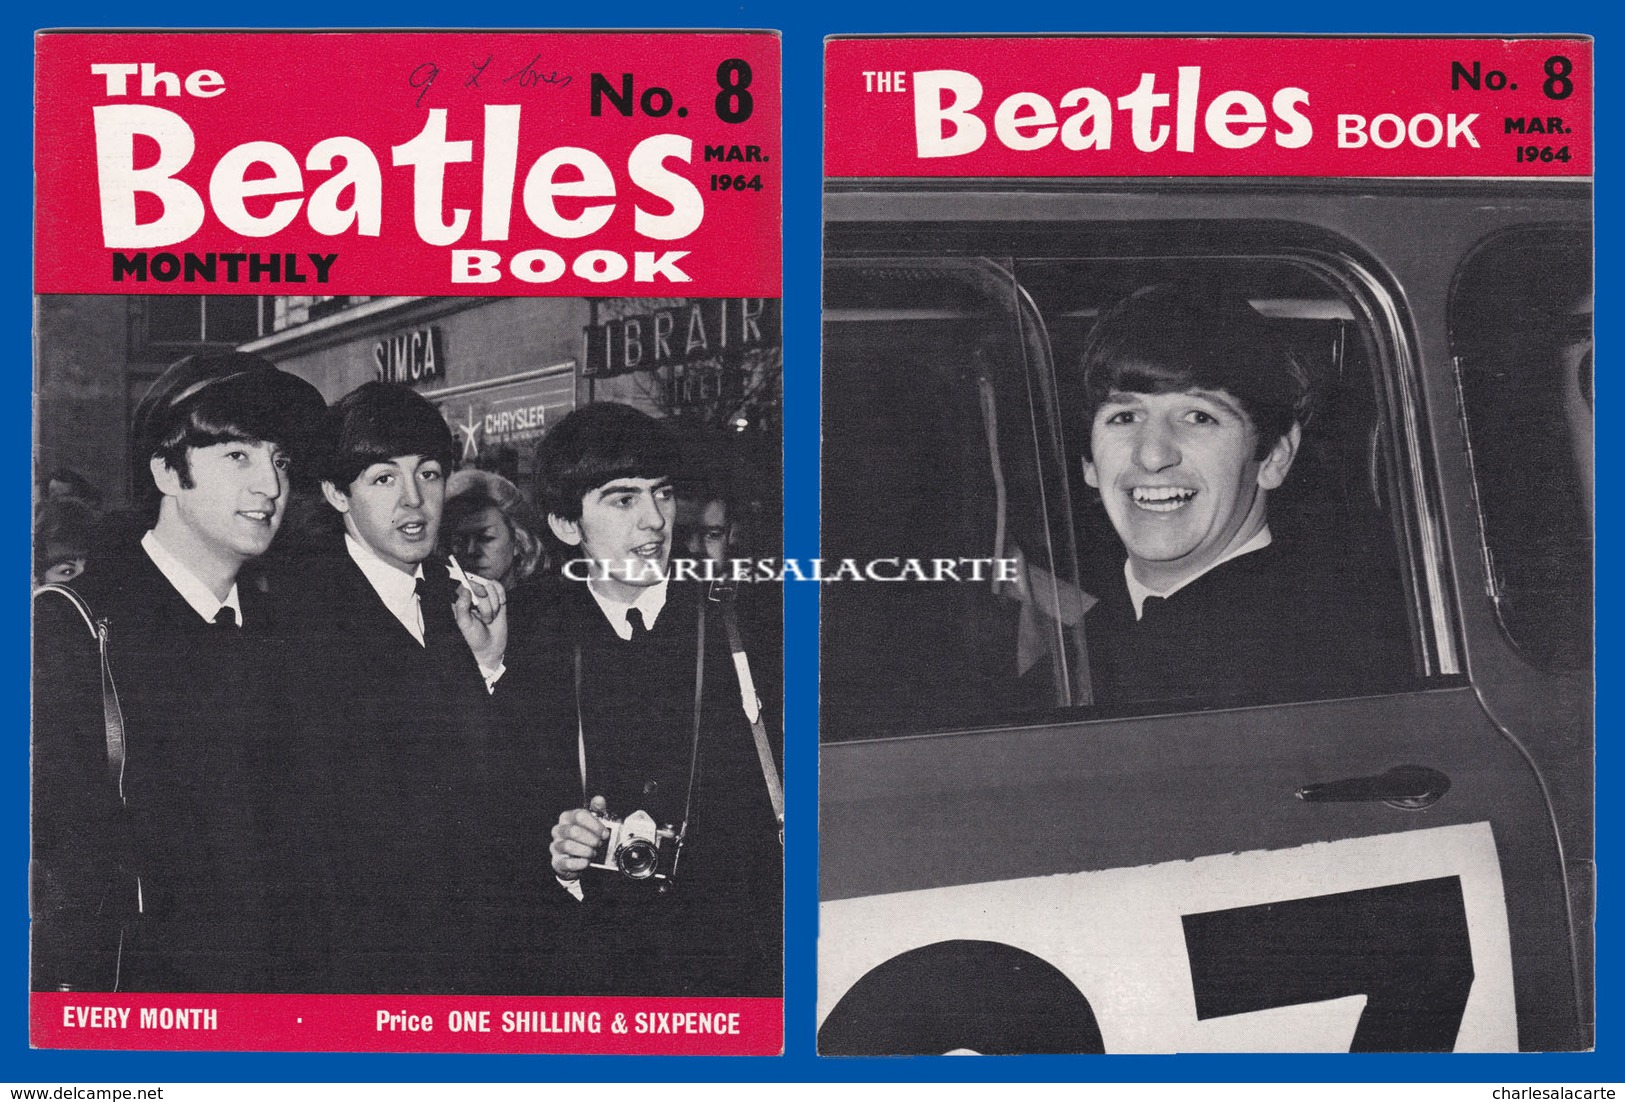 1964 MARCH THE BEATLES MONTHLY BOOK No.8 AUTHENTIC SUBERB CONDITION SEE THE SCAN - Divertimento